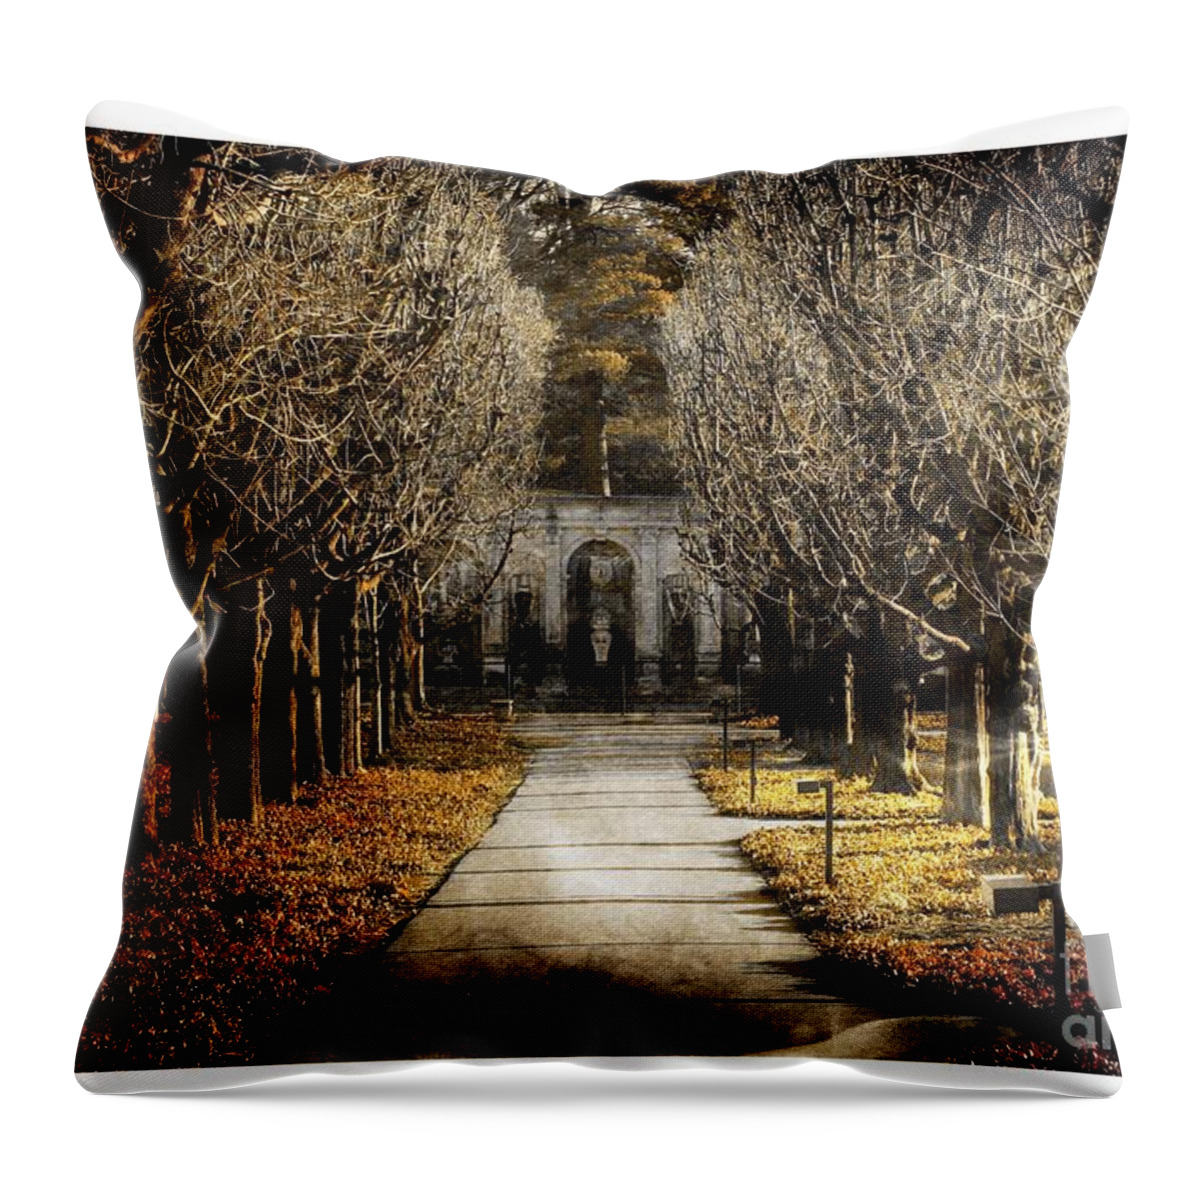 Marcia Lee Jones Throw Pillow featuring the photograph A Glamorous Era by Marcia Lee Jones